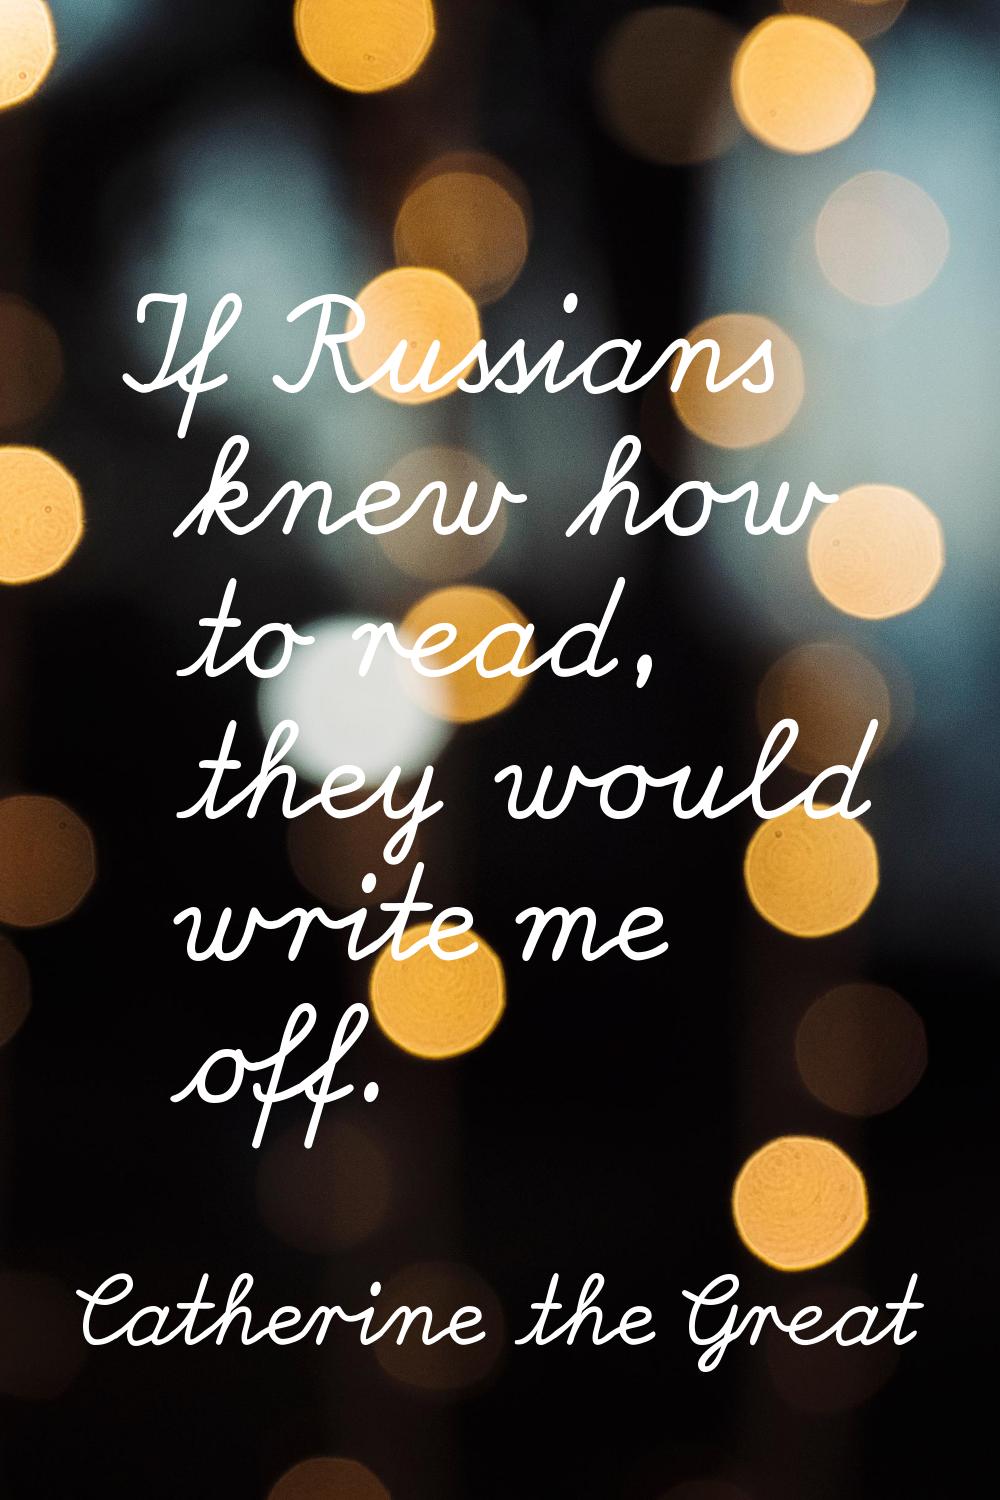 If Russians knew how to read, they would write me off.